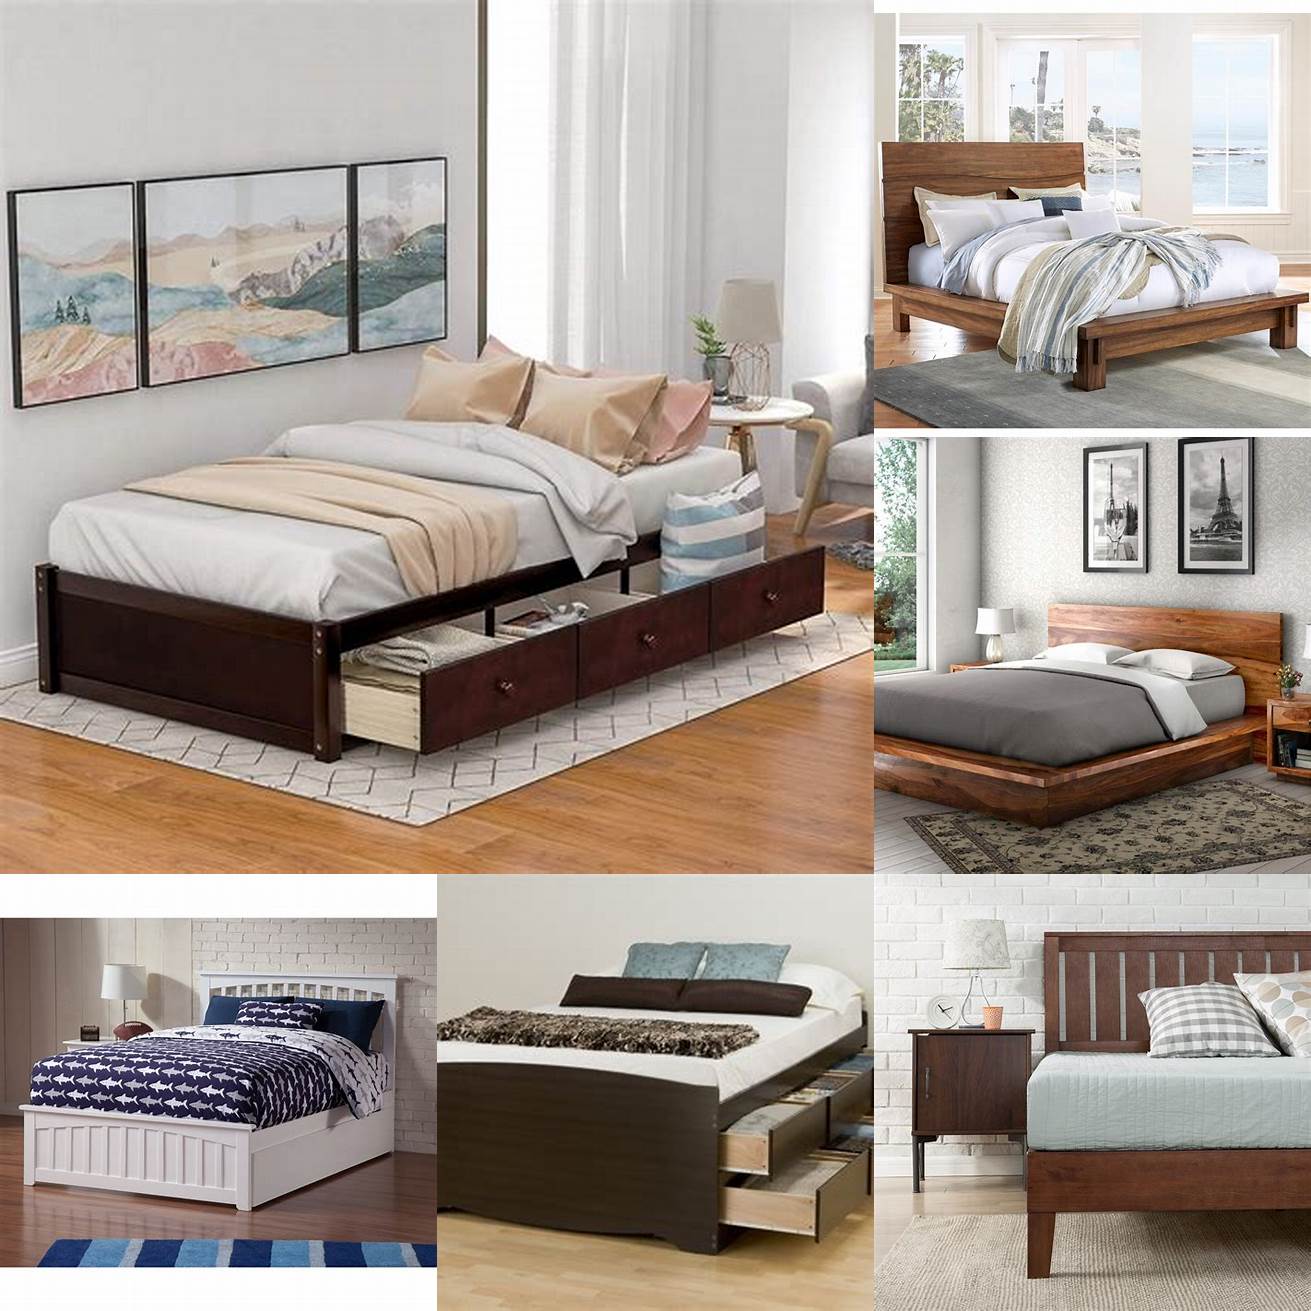 Price Determine your budget for the platform bed